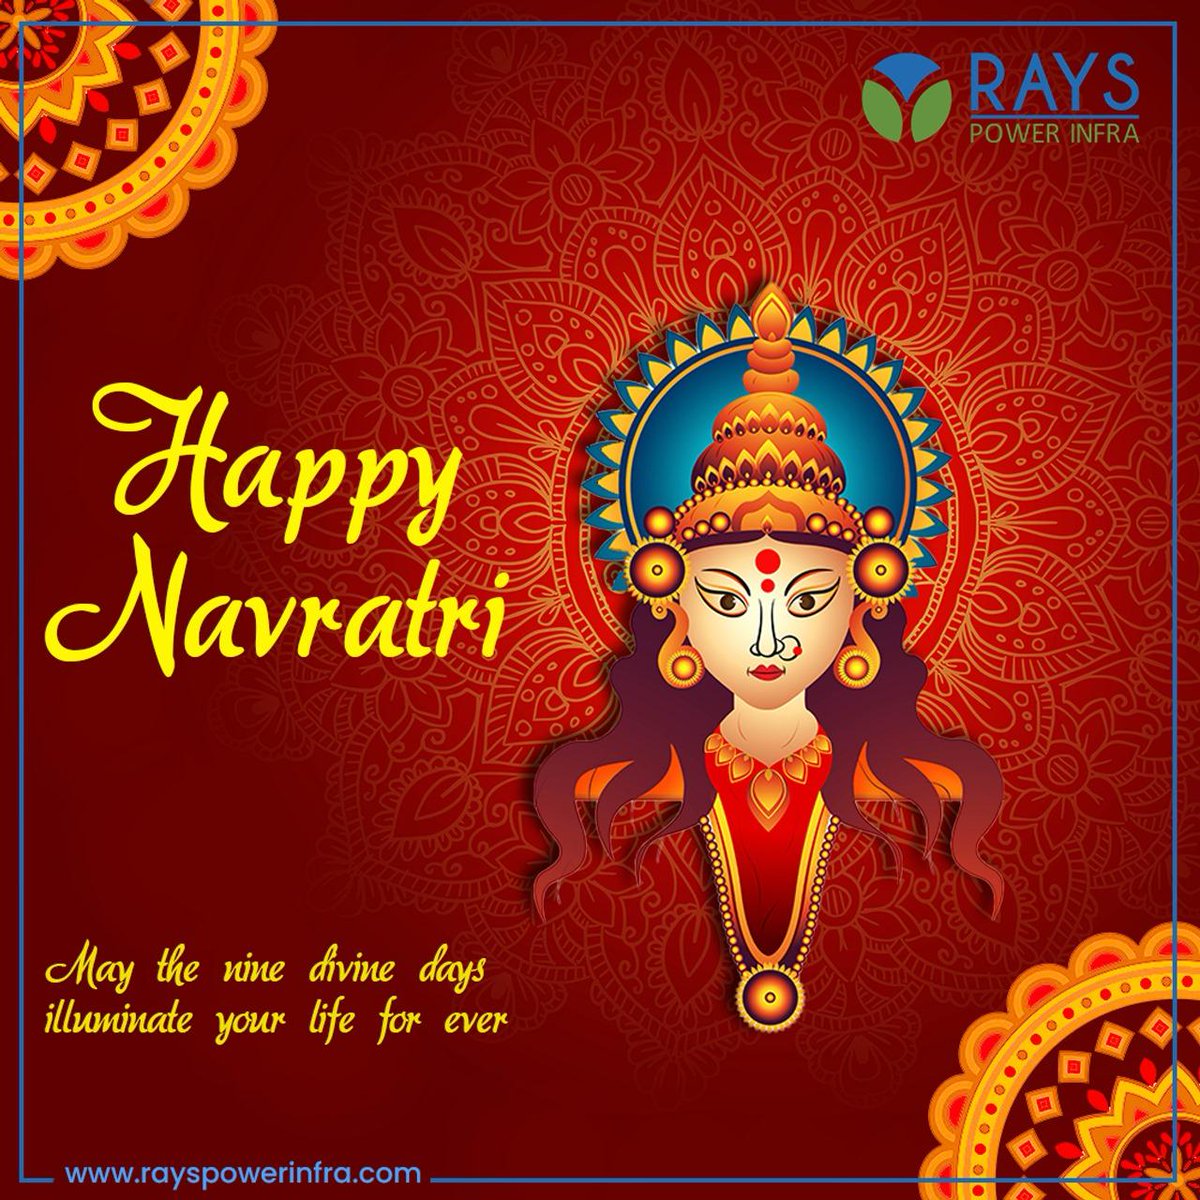 May Maa Durga bless you with strength, courage, and wisdom to overcome all obstacles. Happy Chaitra Navratri!

.

.

#raise_with_rays #rays_power_infra #solar_company #solarpower #sustainableenergy #solarproject #renewalenergy #navarartri #HappyNavaratri